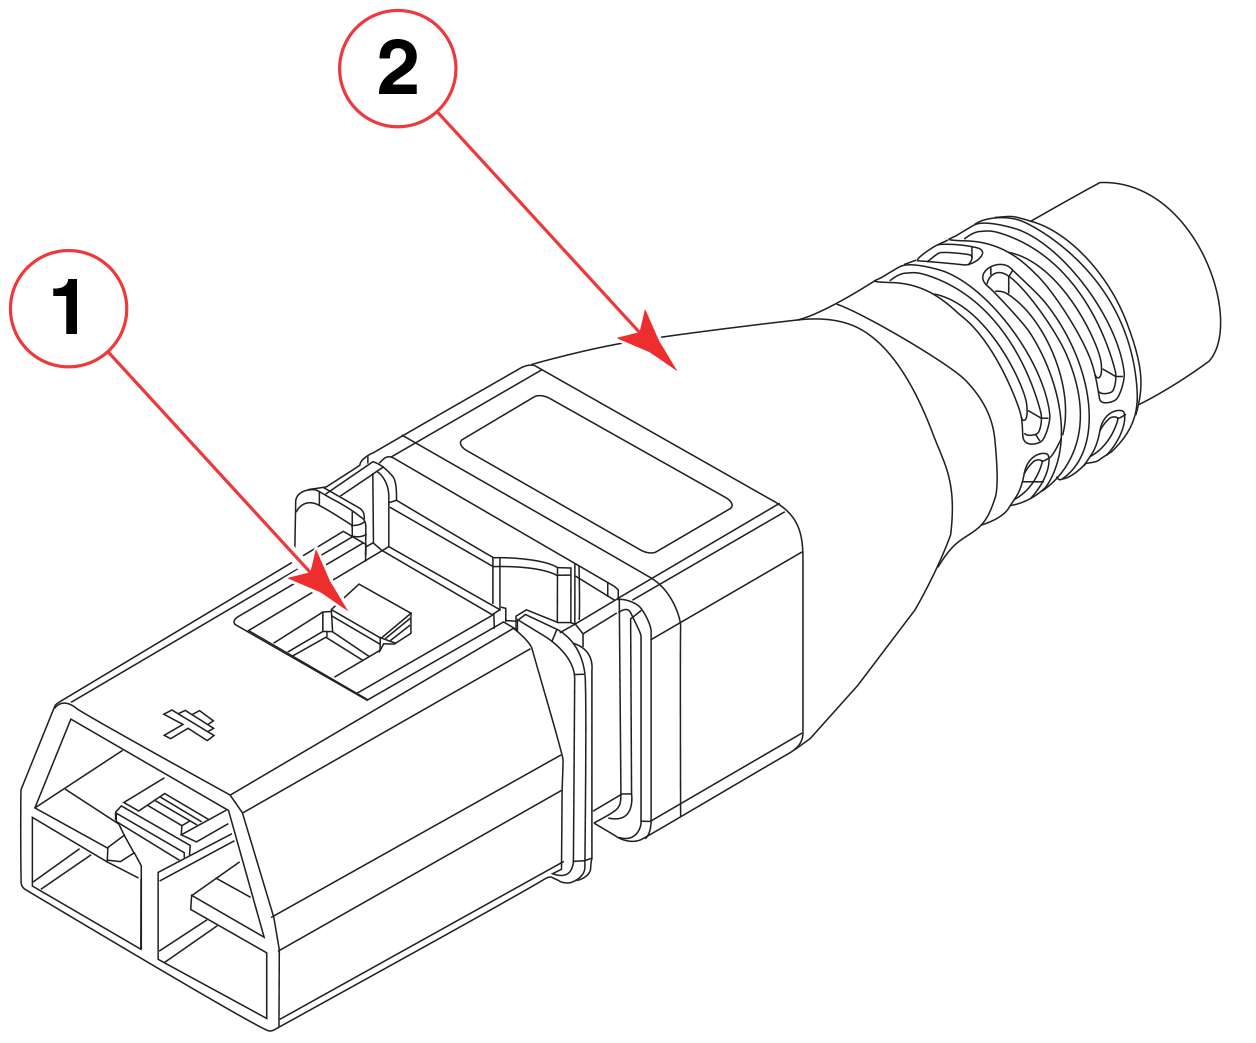 View of power cable connector to power supply and connector latch.